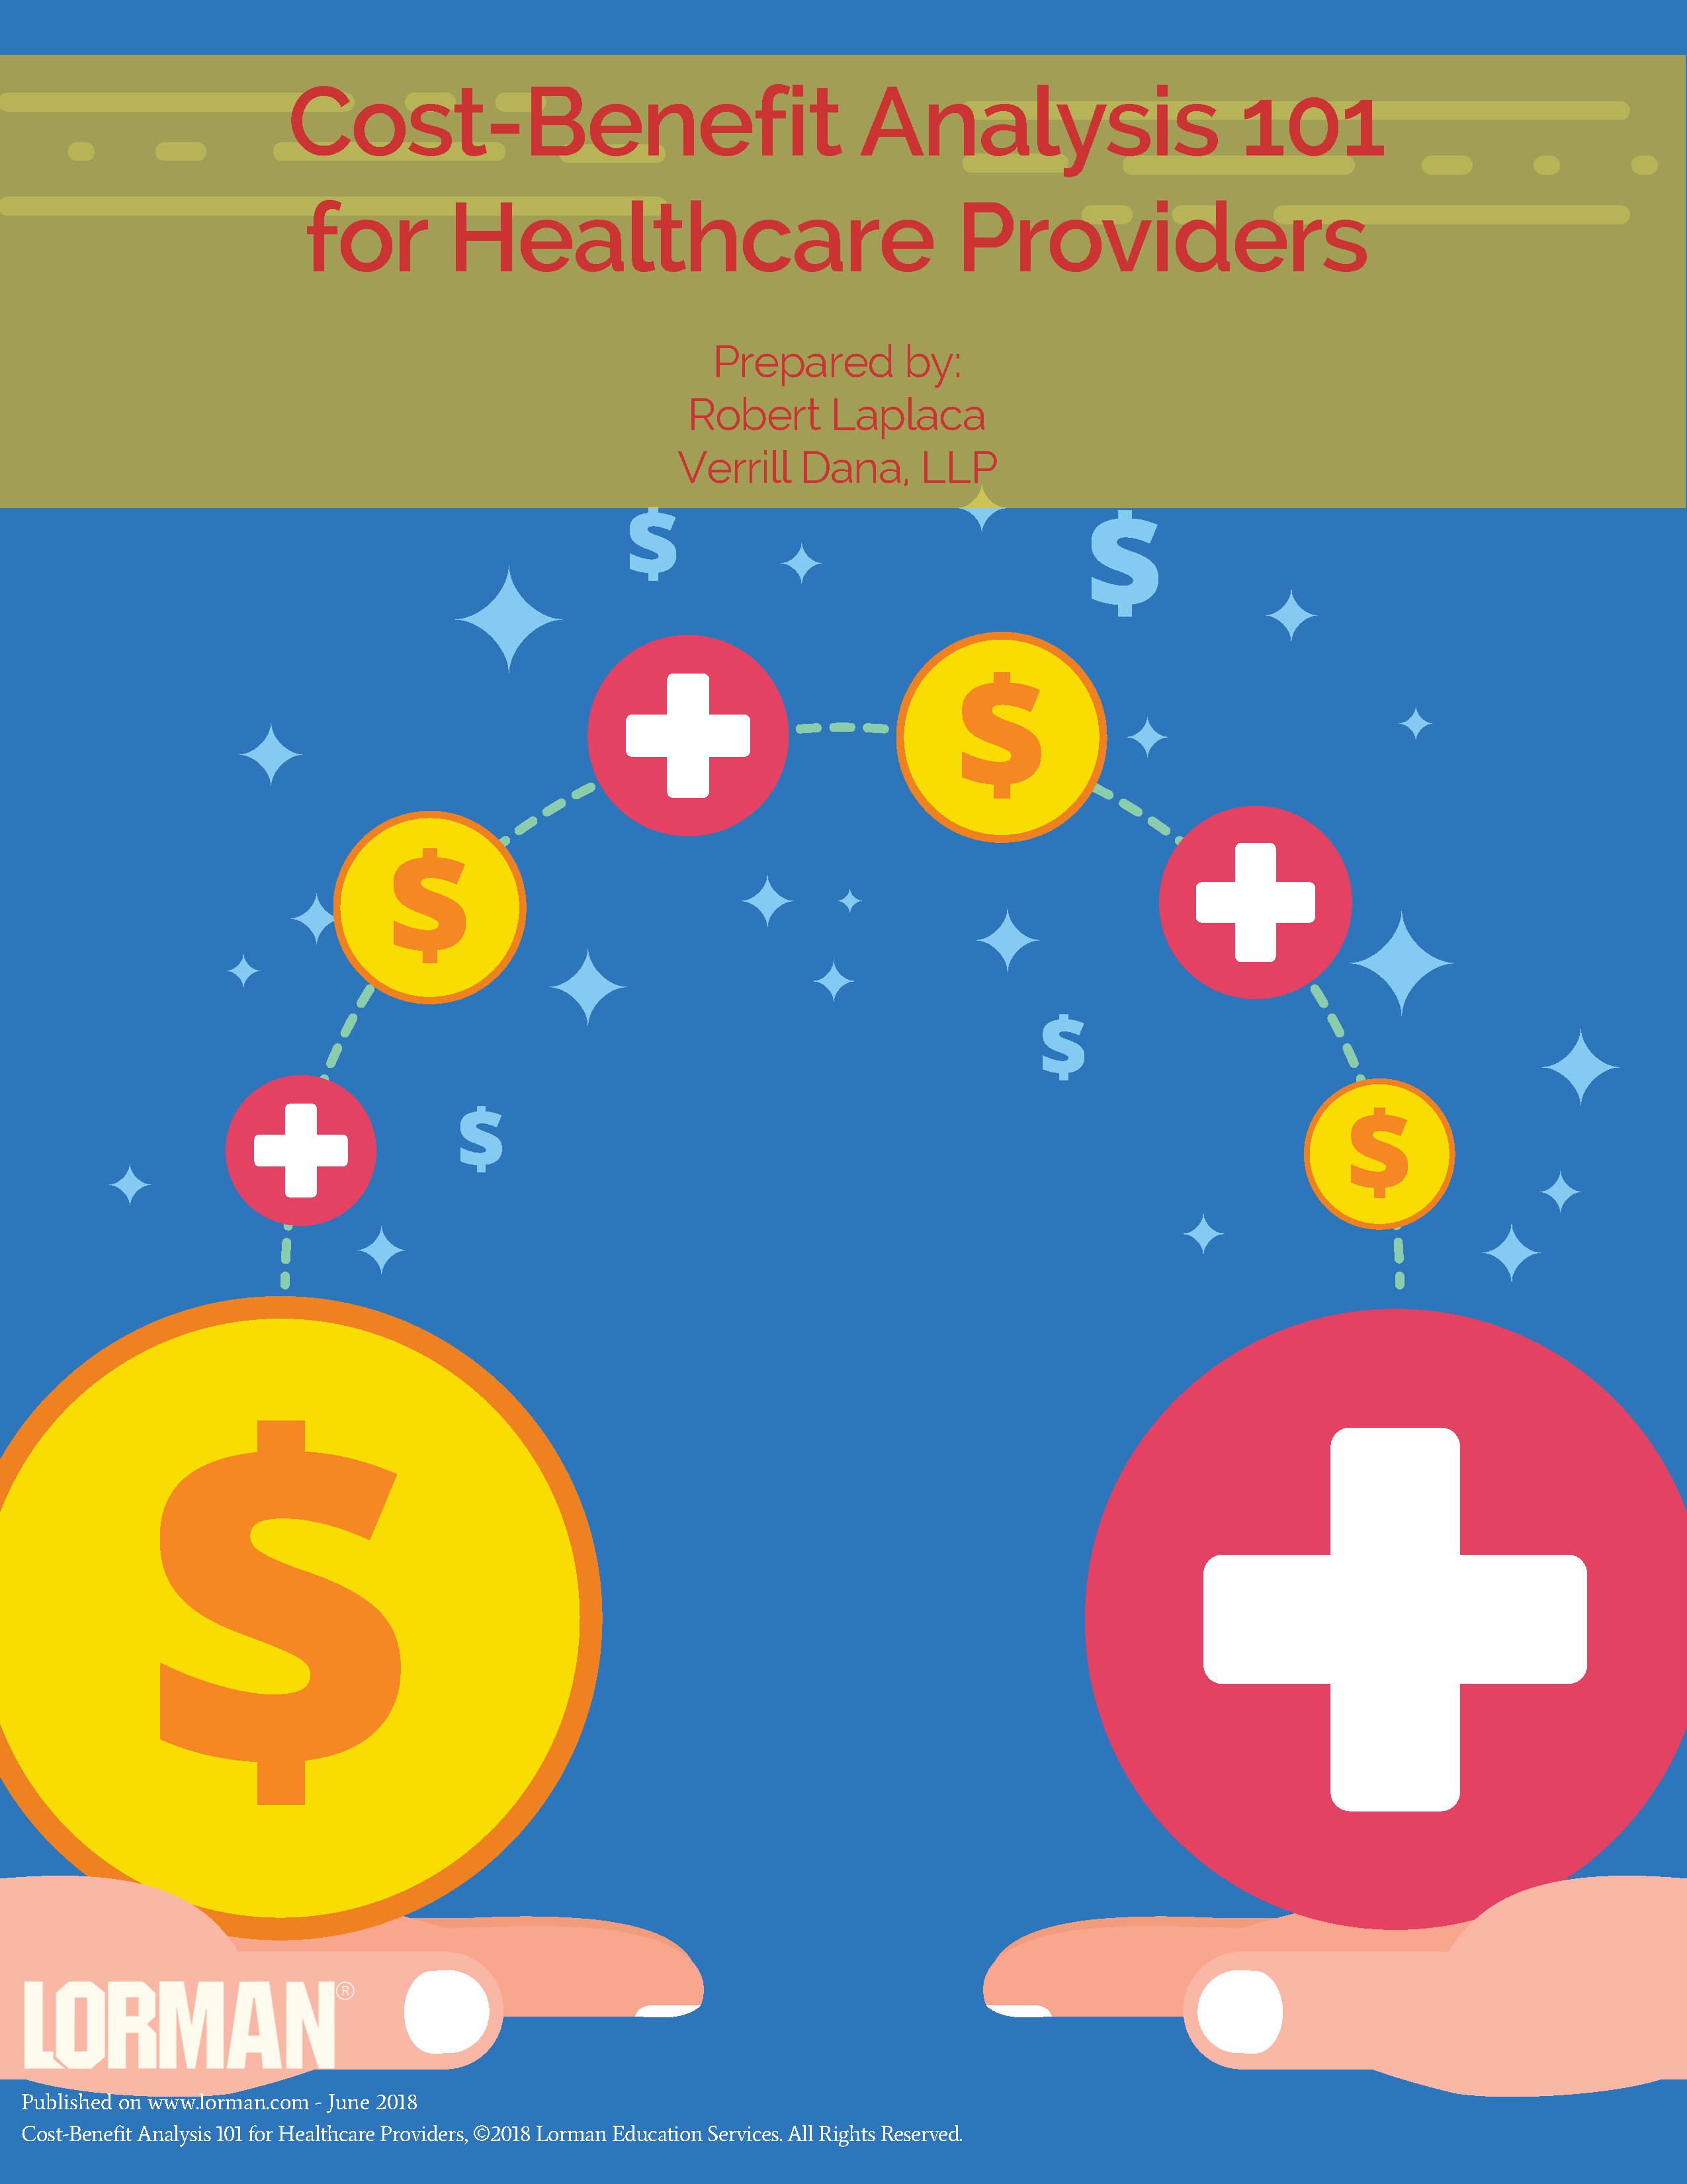 Cost-Benefit Analysis 101 for Healthcare Providers